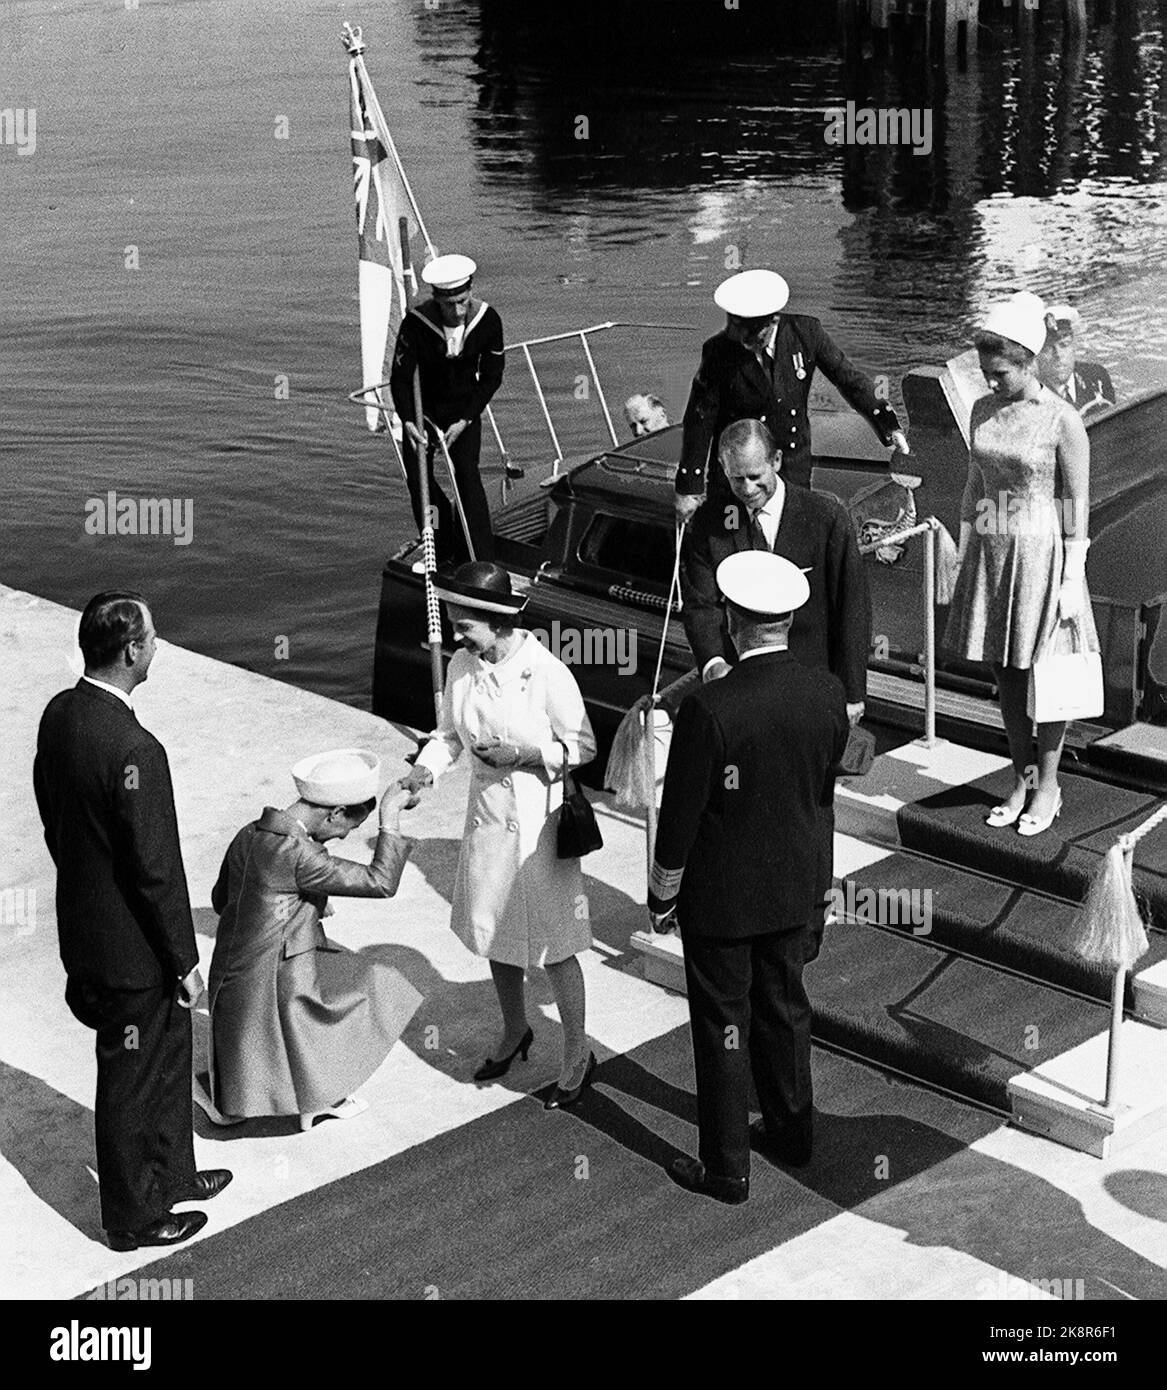 Trondheim 19690810. Queen Elizabeth on a state visit with the family in Norway. Here on the arrival of Trondheim where the Norwegian royal family welcomed them. Crown Princess Sonja does not have deep when greeting Queen Elizabeth. Eg. Crown Prince Harald, Crown Princess Sonja, Queen Elizabeth, King Olav, Prince Philip and Princess Anne. Runs. Ntb archive / ntb Stock Photo